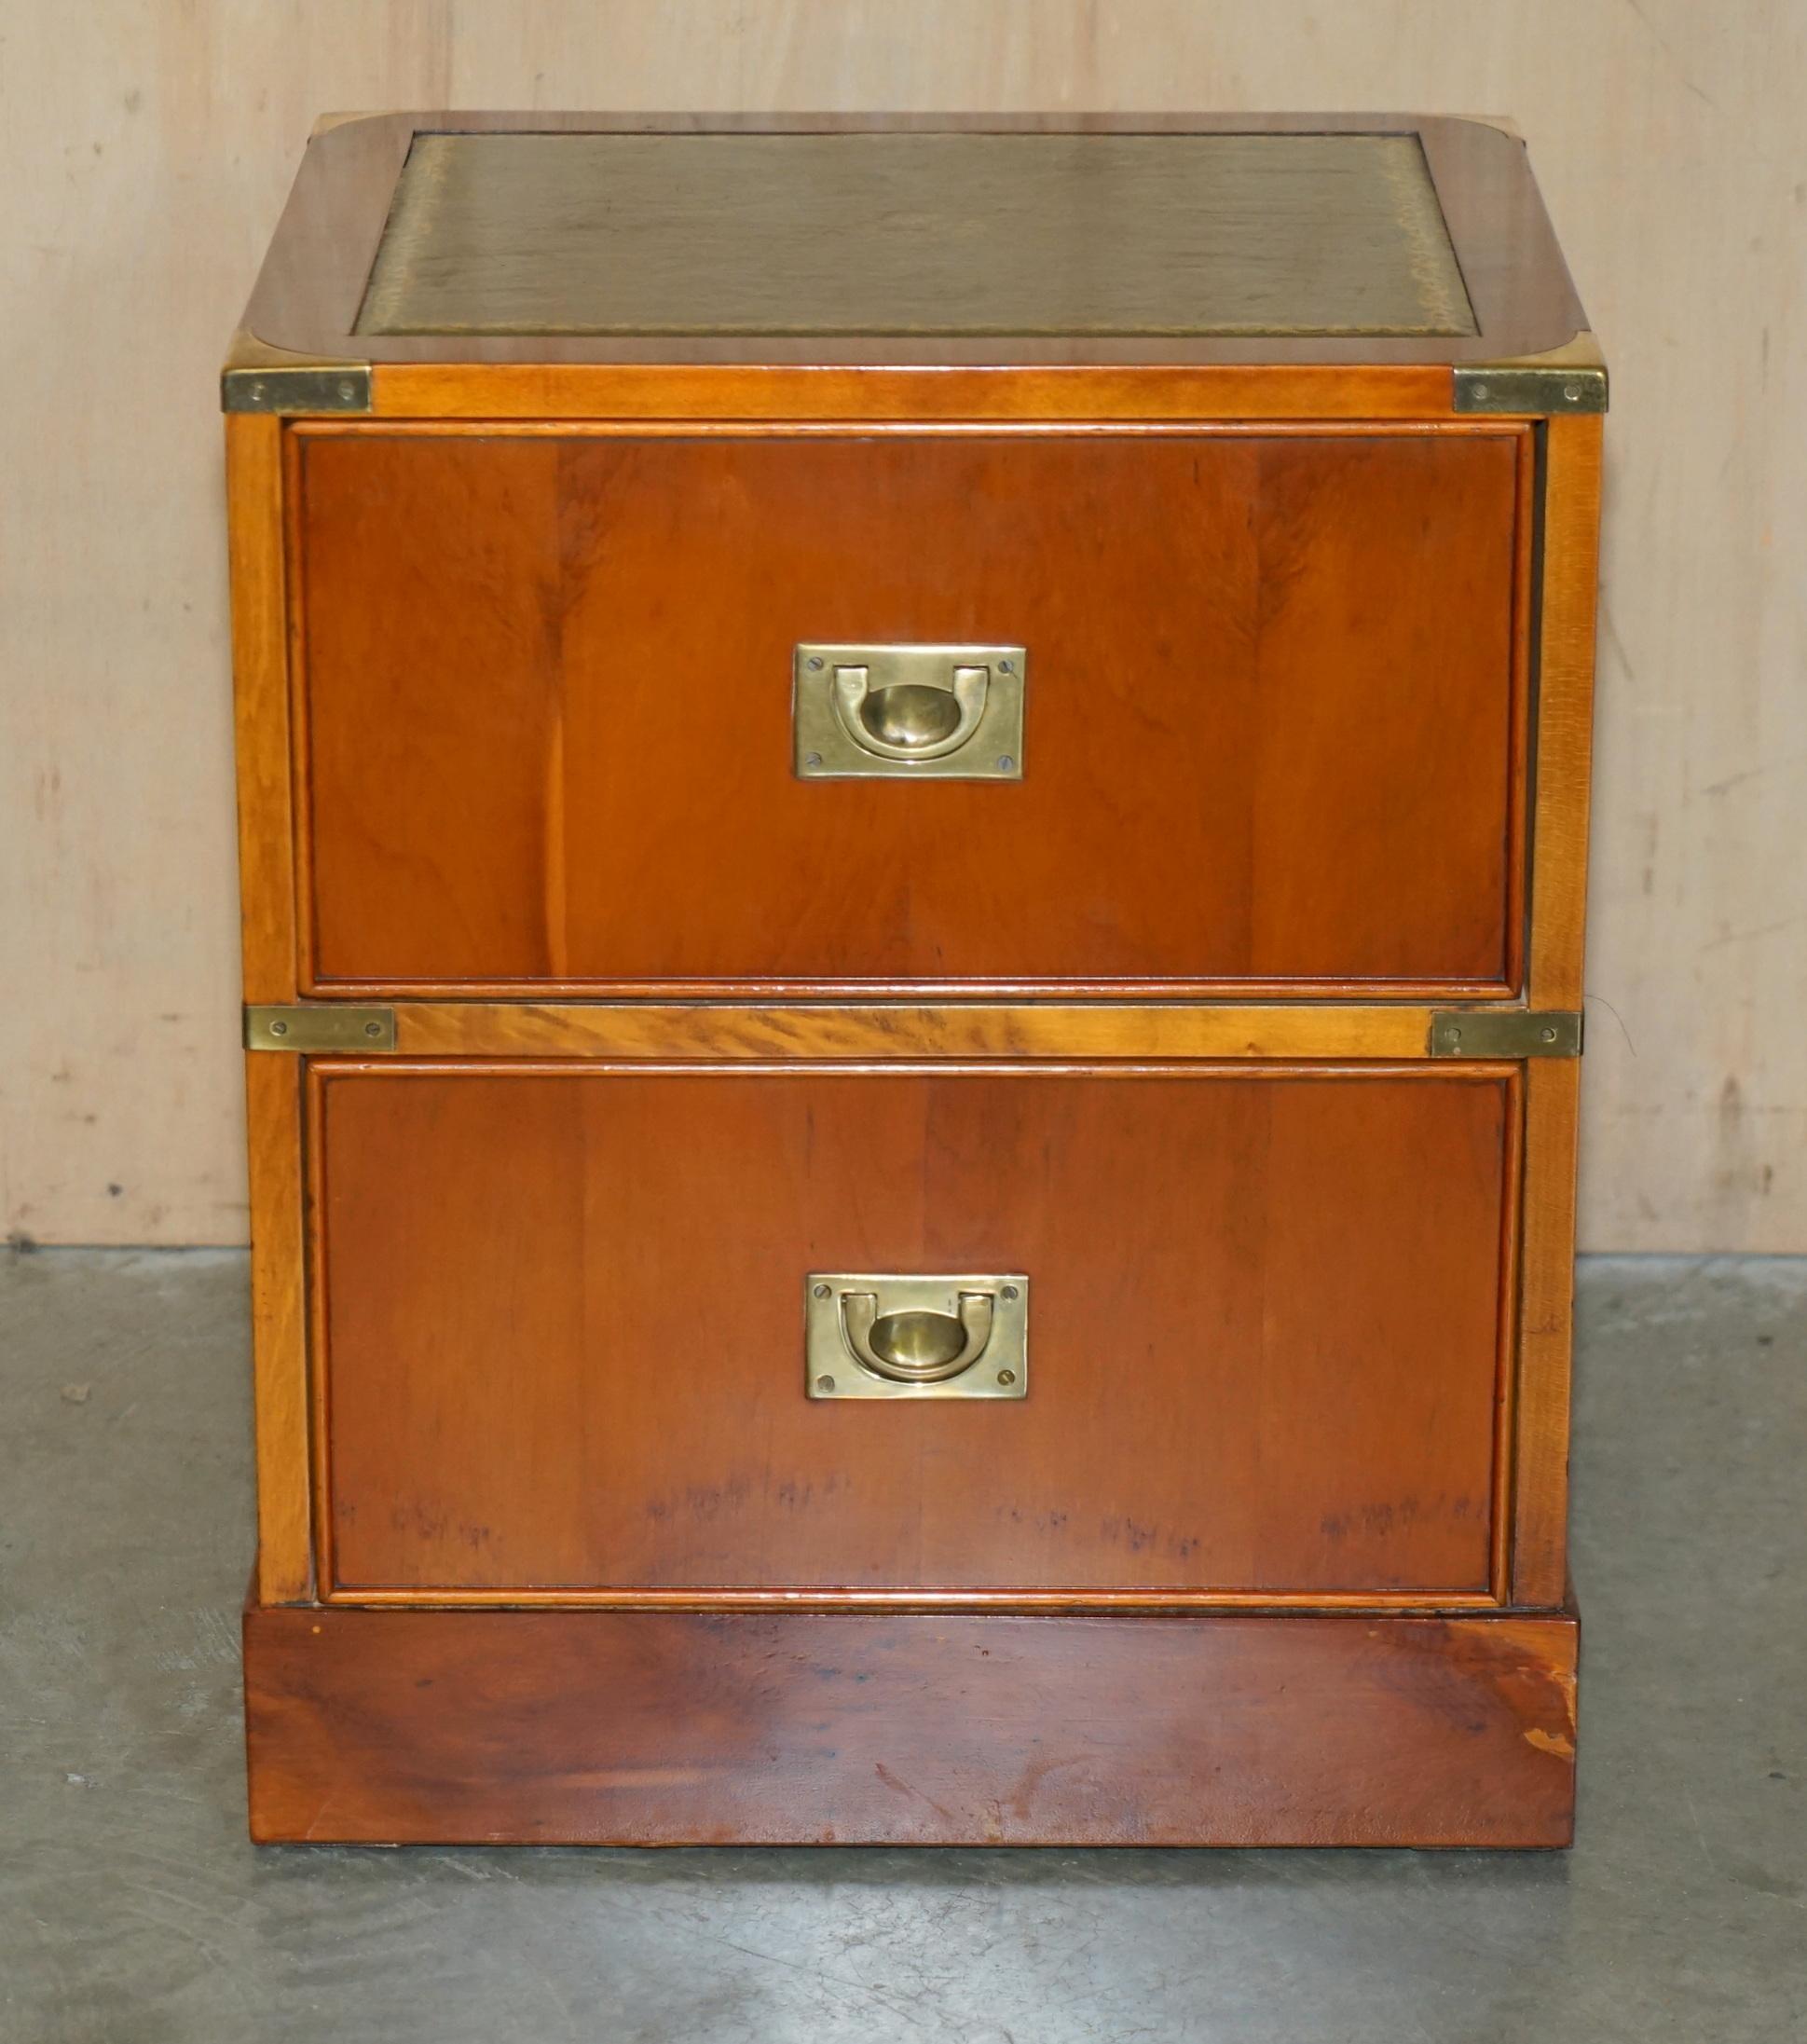 LOVELY PAiR OF BURR YEW WOOD GREEN LEATHER MILITARY CAMPAIGN NIGHTSTAND DRAWERS (Kampagne) im Angebot